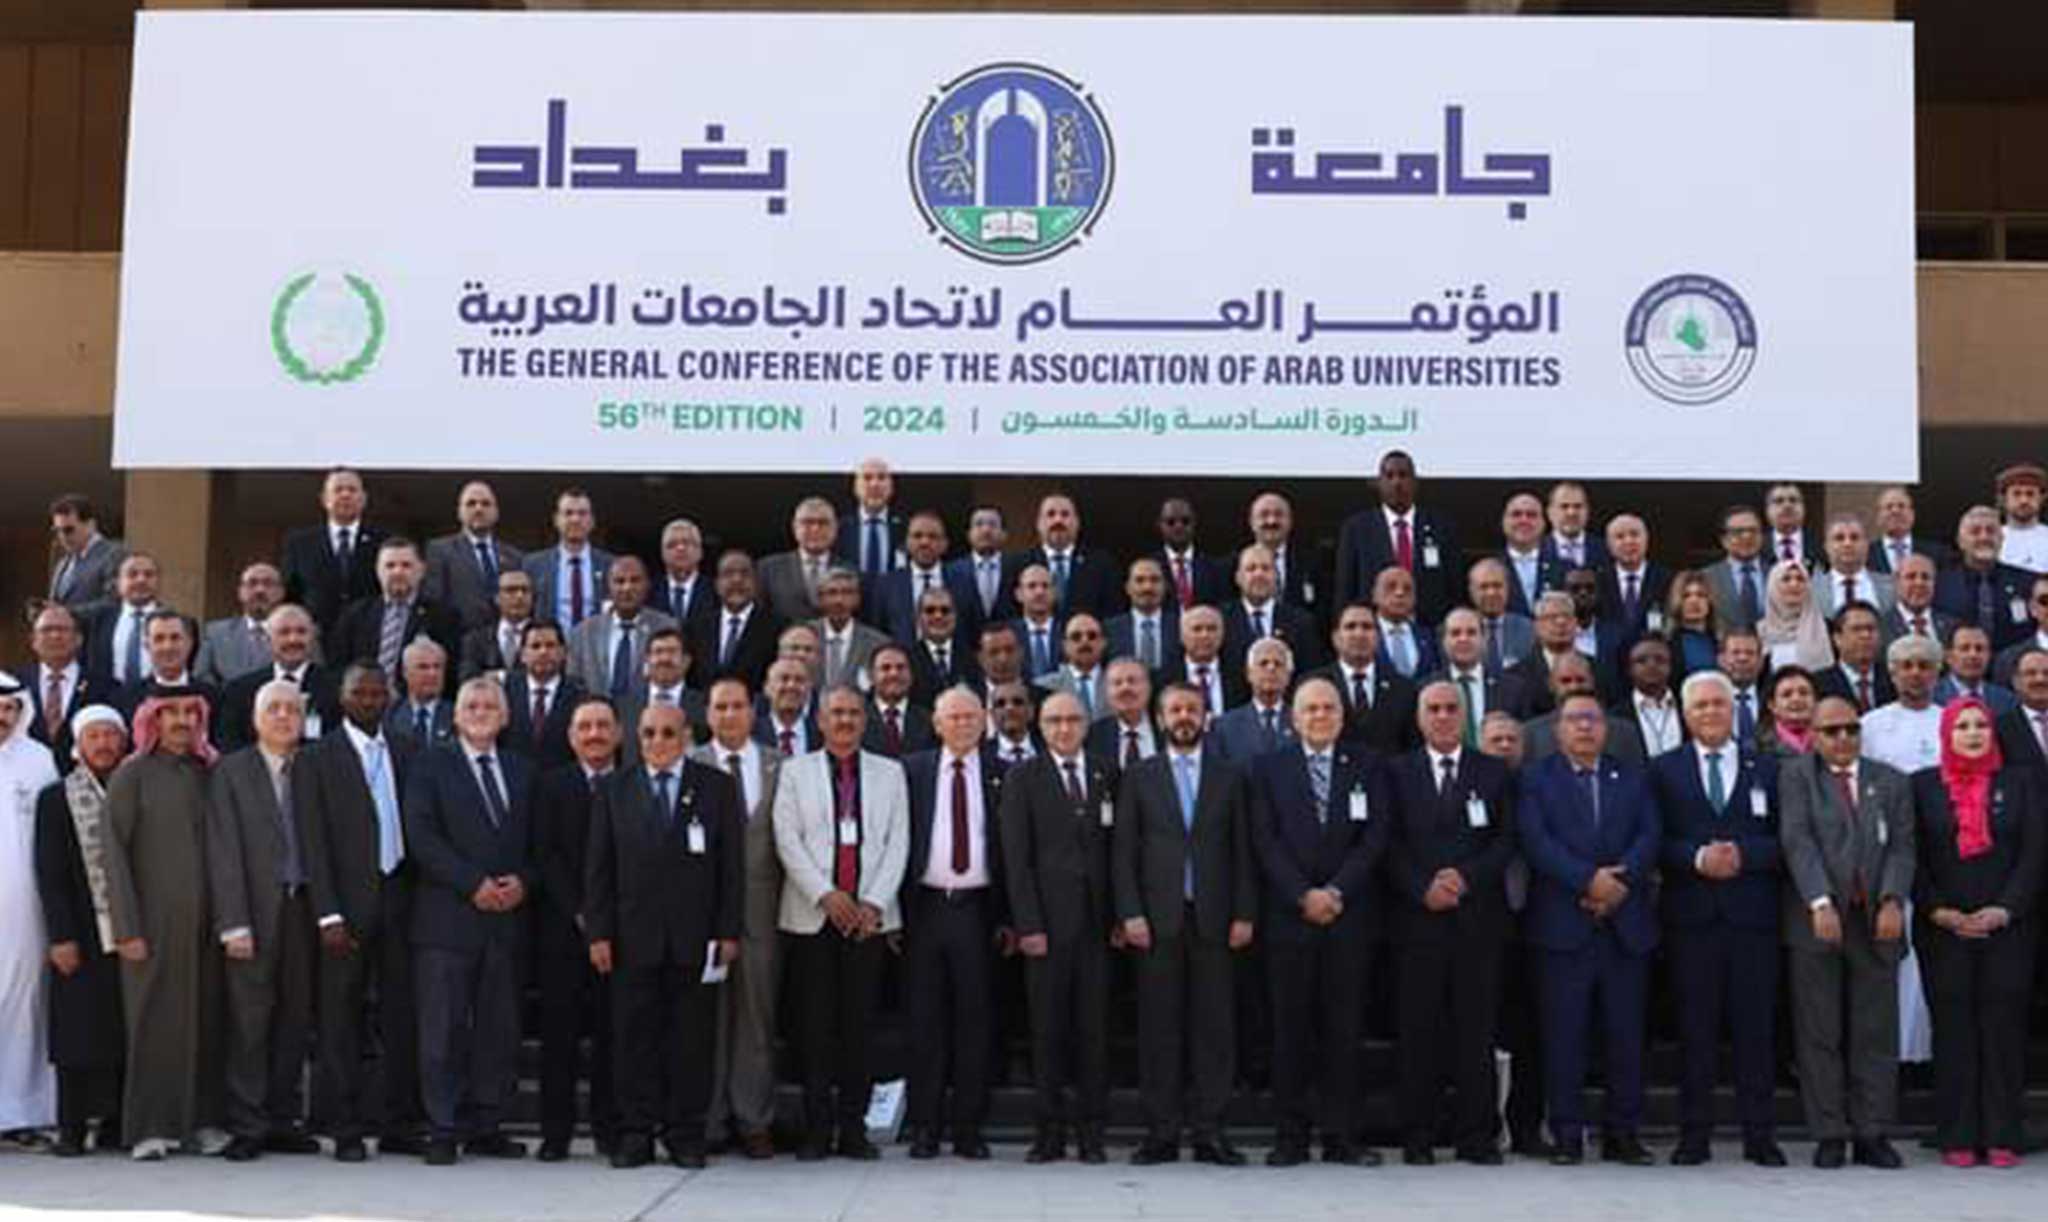 56th Session of The General Conference of The Association of Arab Universities